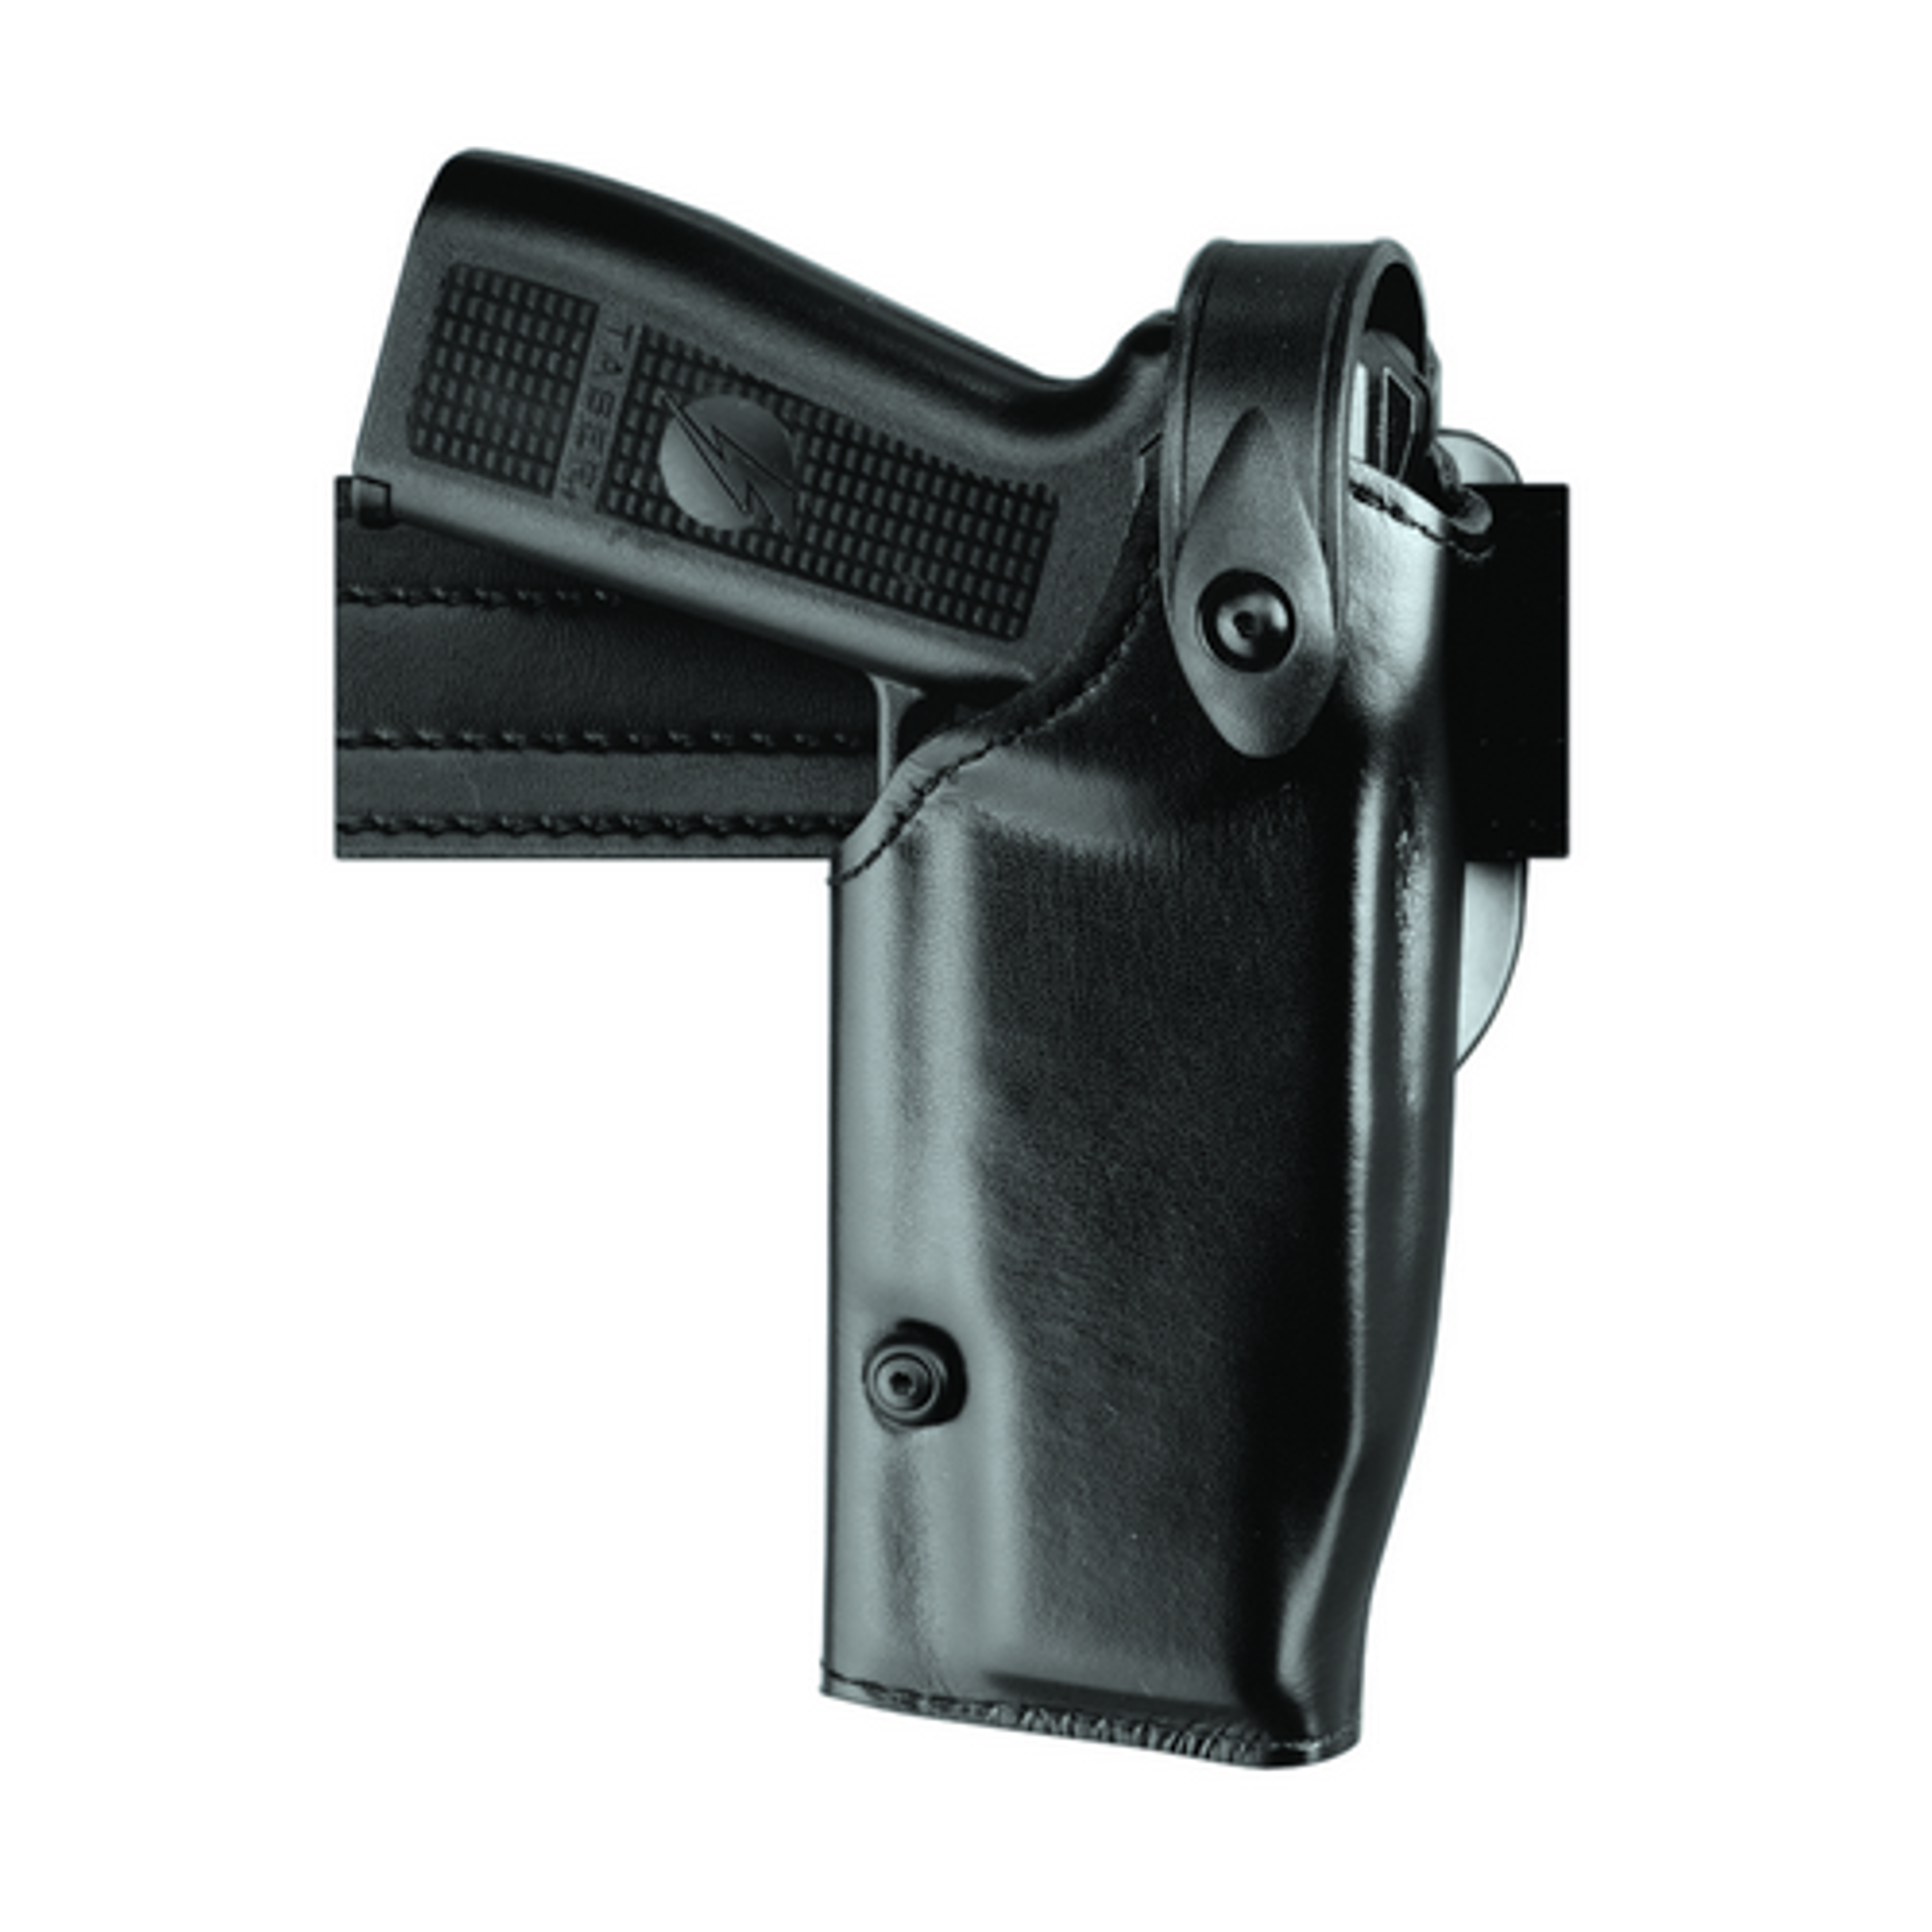 Model 6280 Sls Mid-ride Level Ii Retention Duty Holster For Smith & Wesson M&p 9 W/ Light - KR6280-21921-81